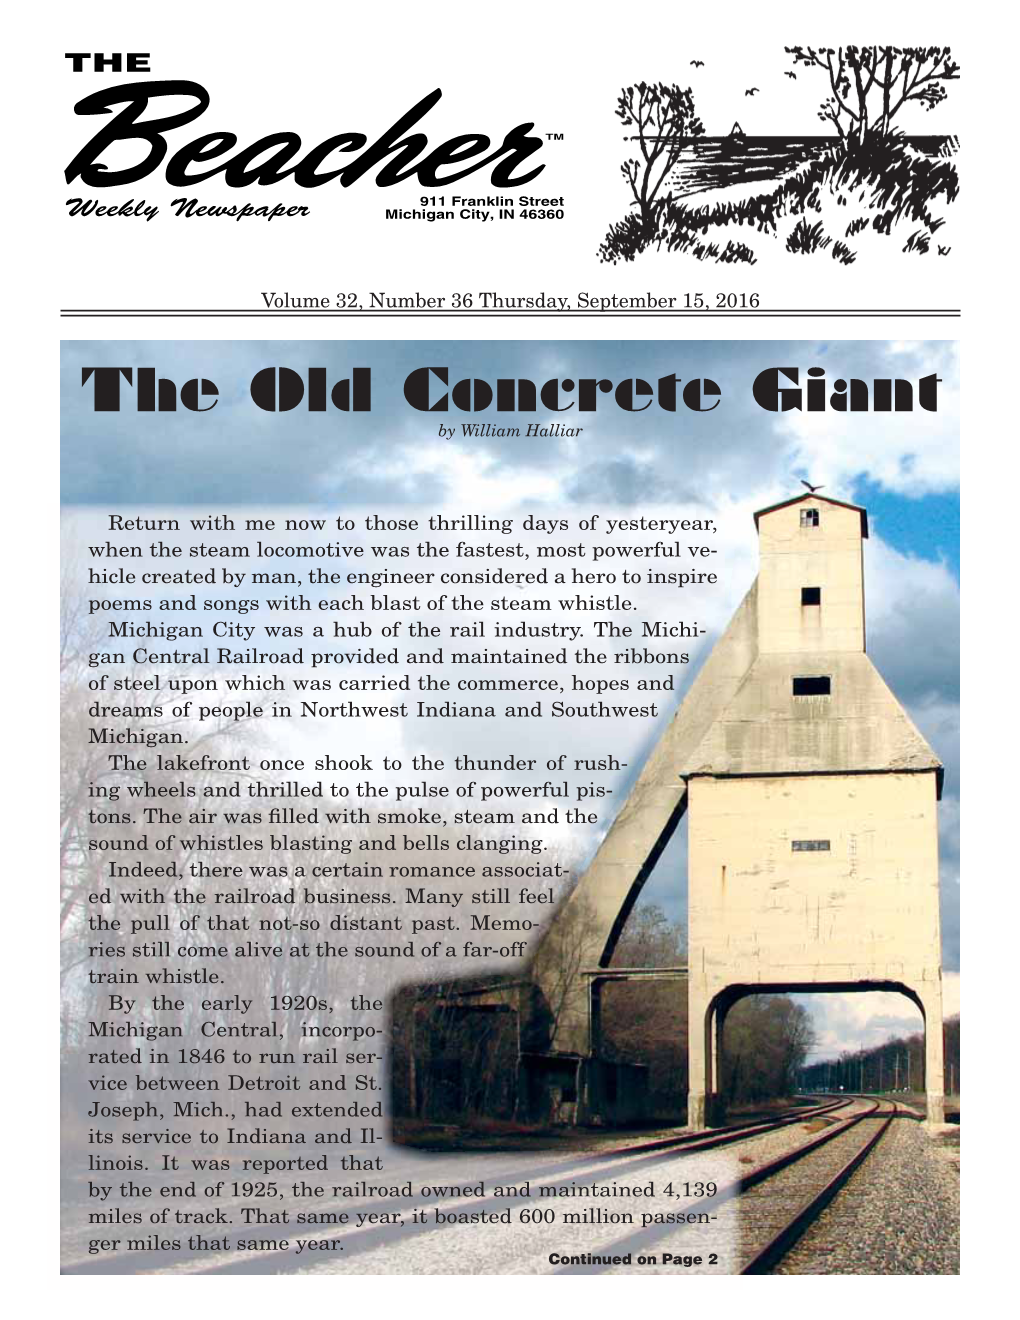 The Old Concrete Giant by William Halliar